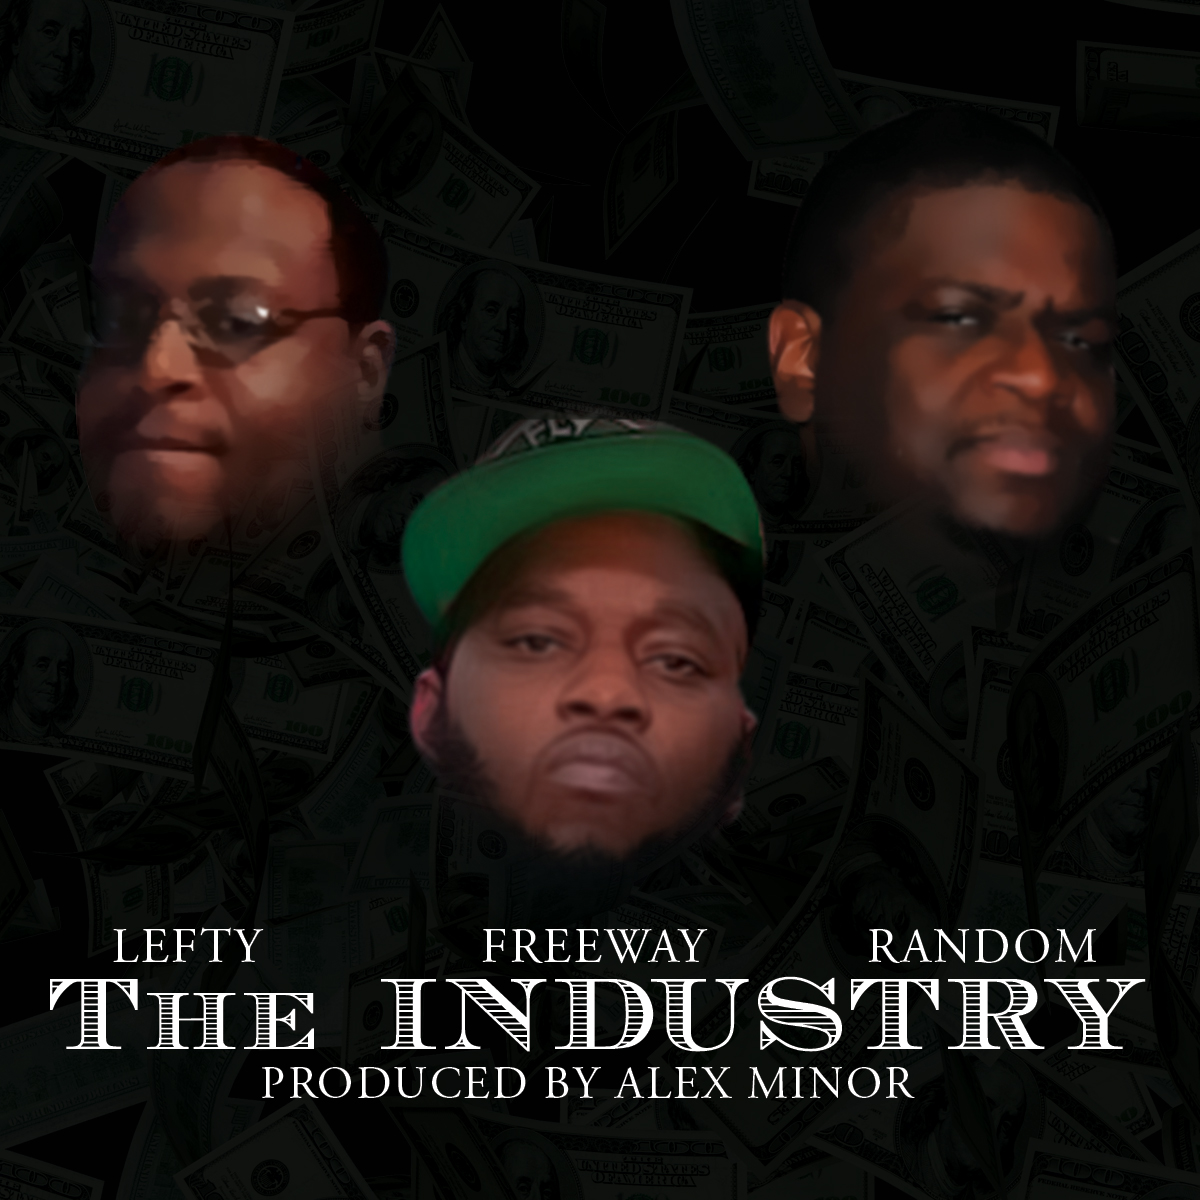 lefty-the-industry-ft-freeway-random-prod-by-alex-minor-HHS1987-2013 Lefty - The Industry Ft. Freeway & Random (Prod by Alex Minor)  